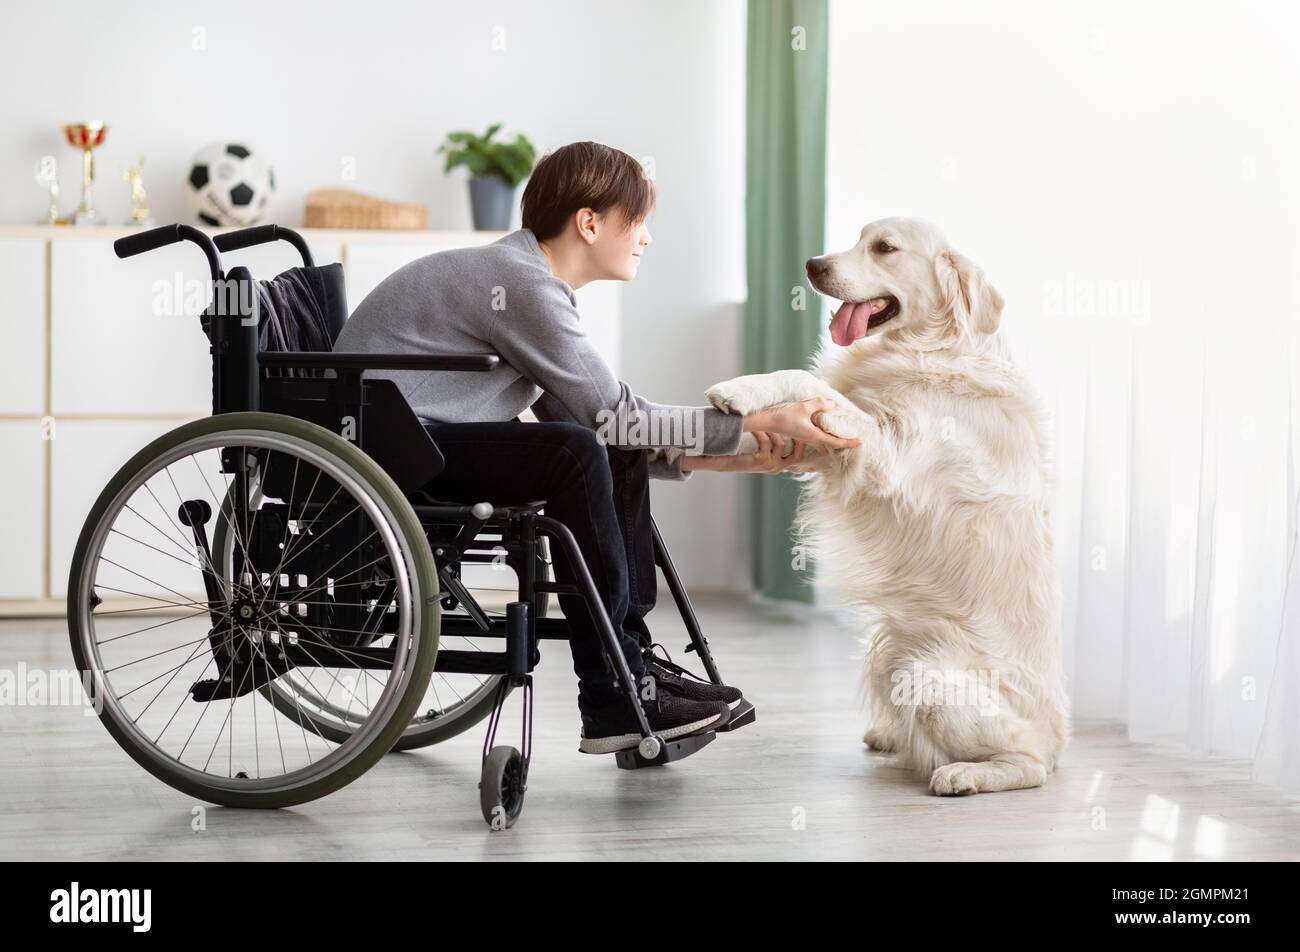 Disabled teenage boy in wheelchair playing with his dog at home. Animal human friendship concept Stock Photo